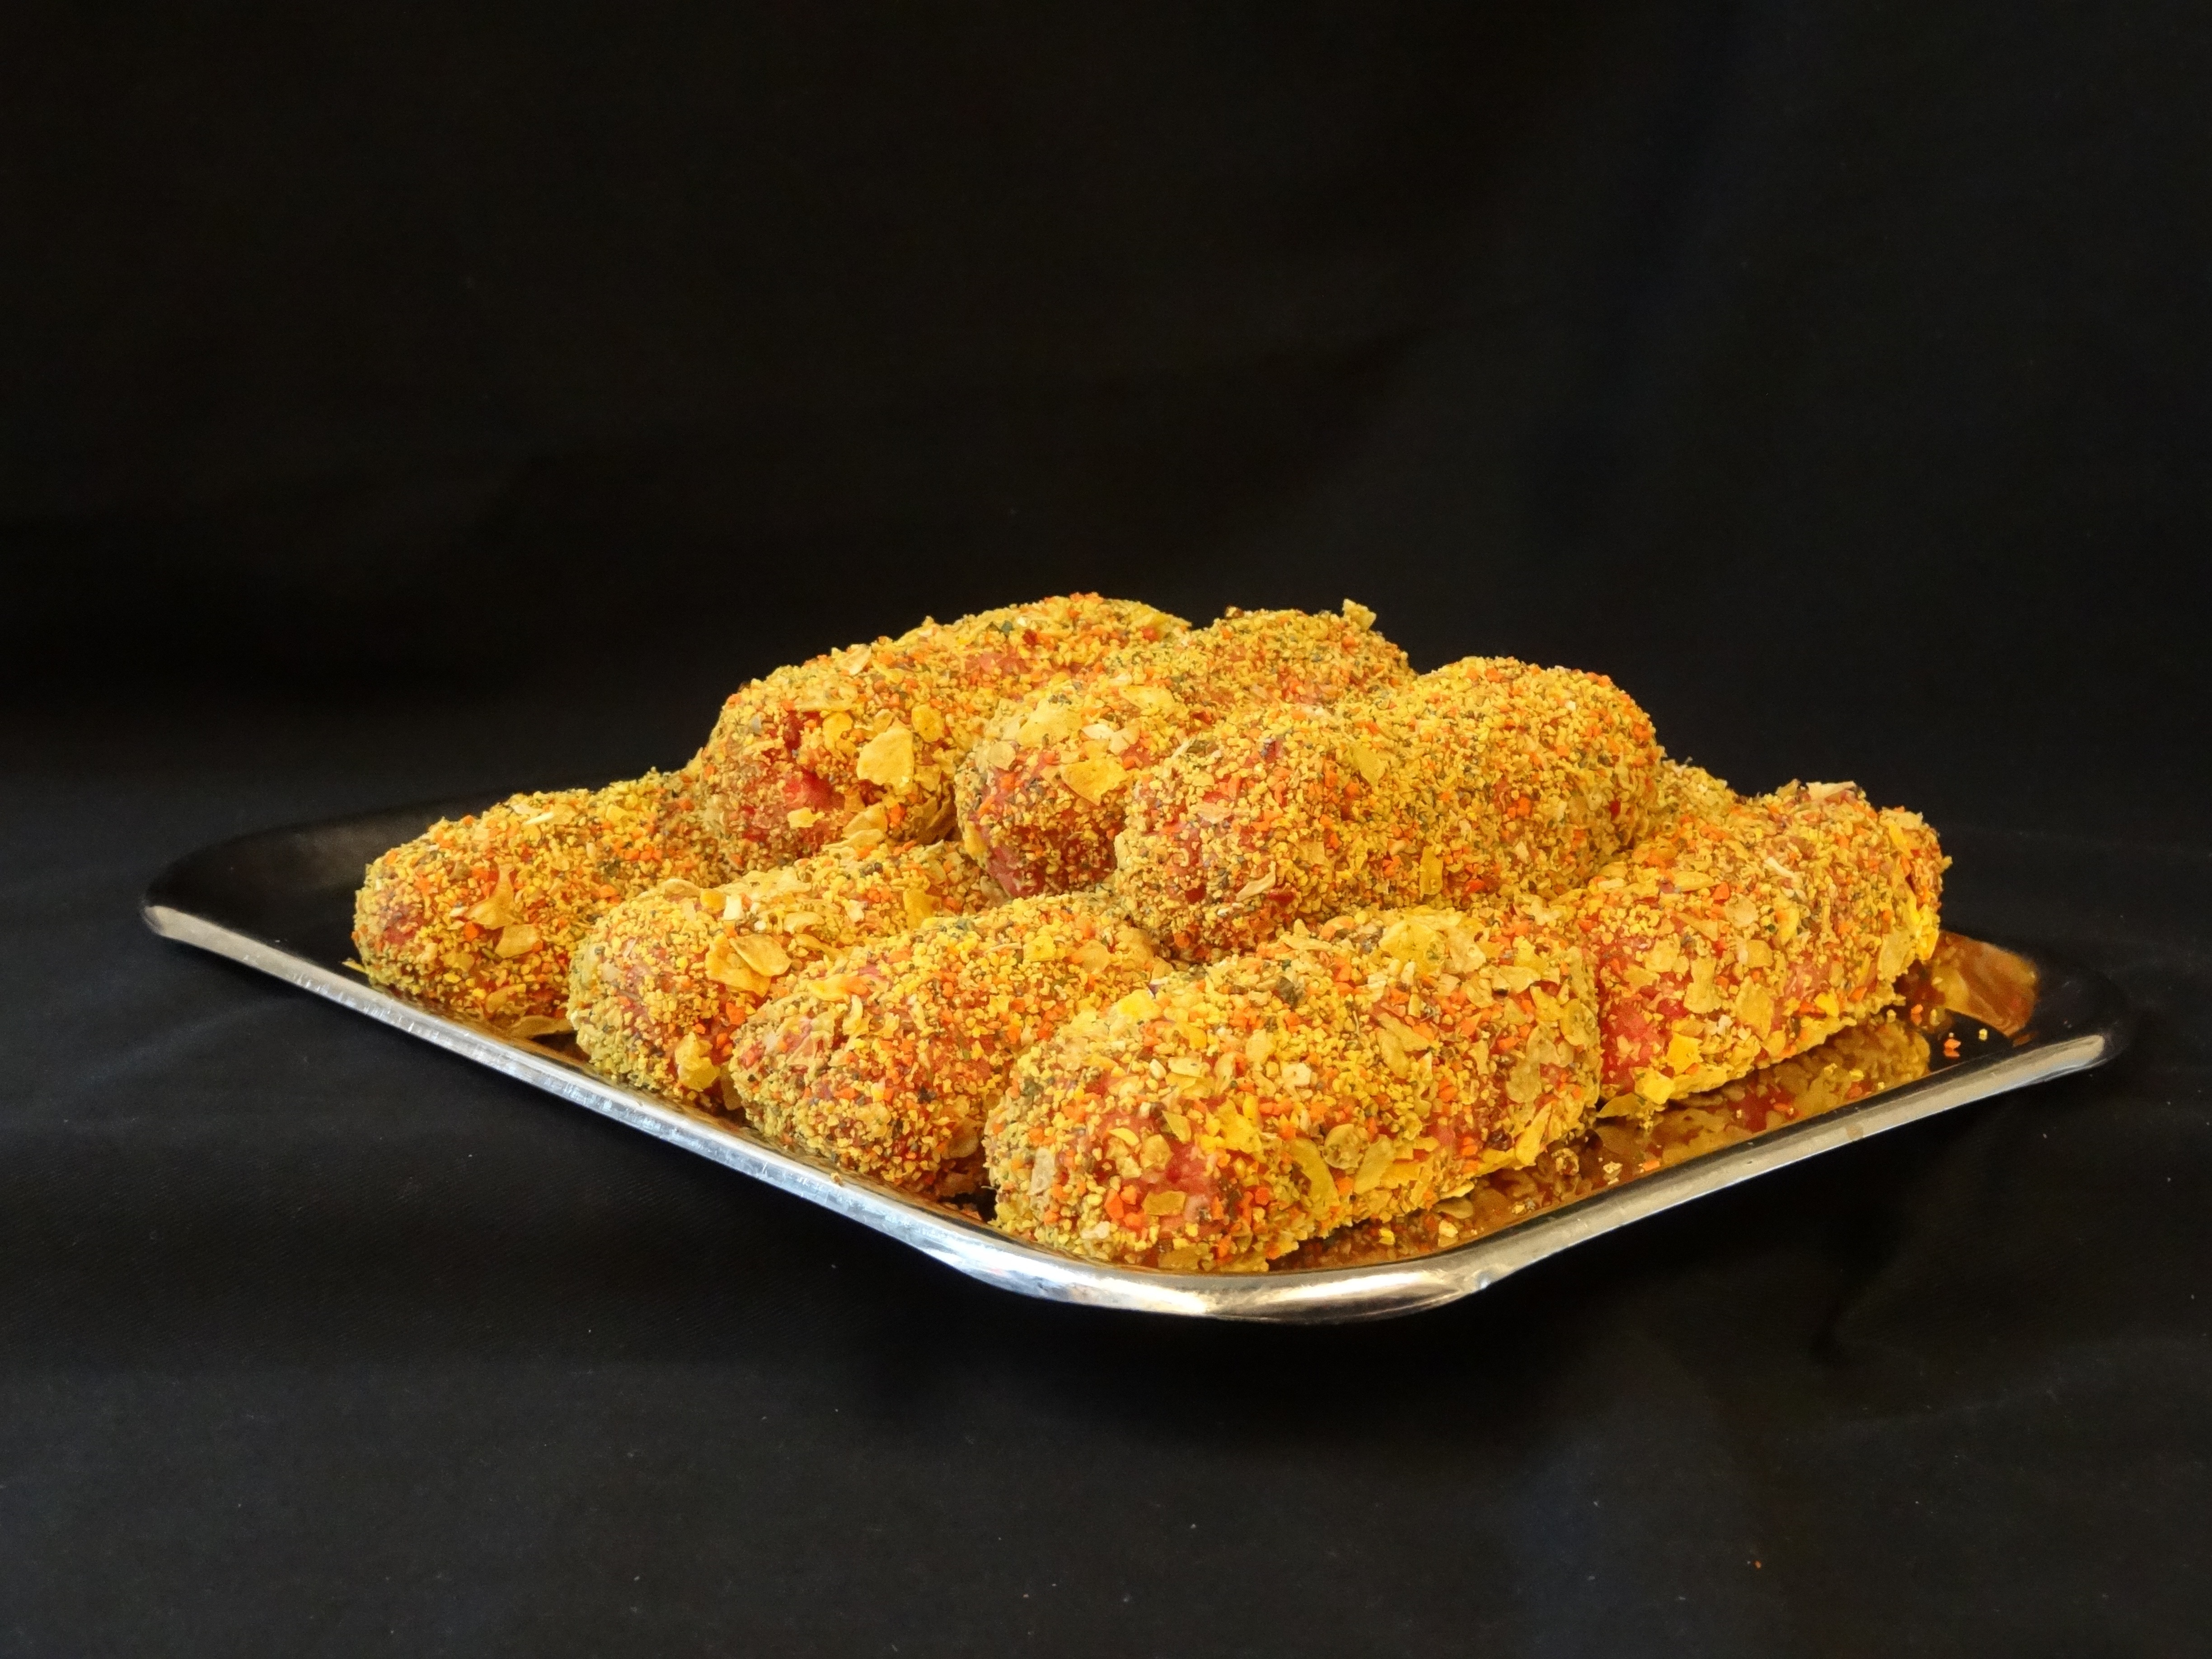 yellow bread rolled with bread crumbs